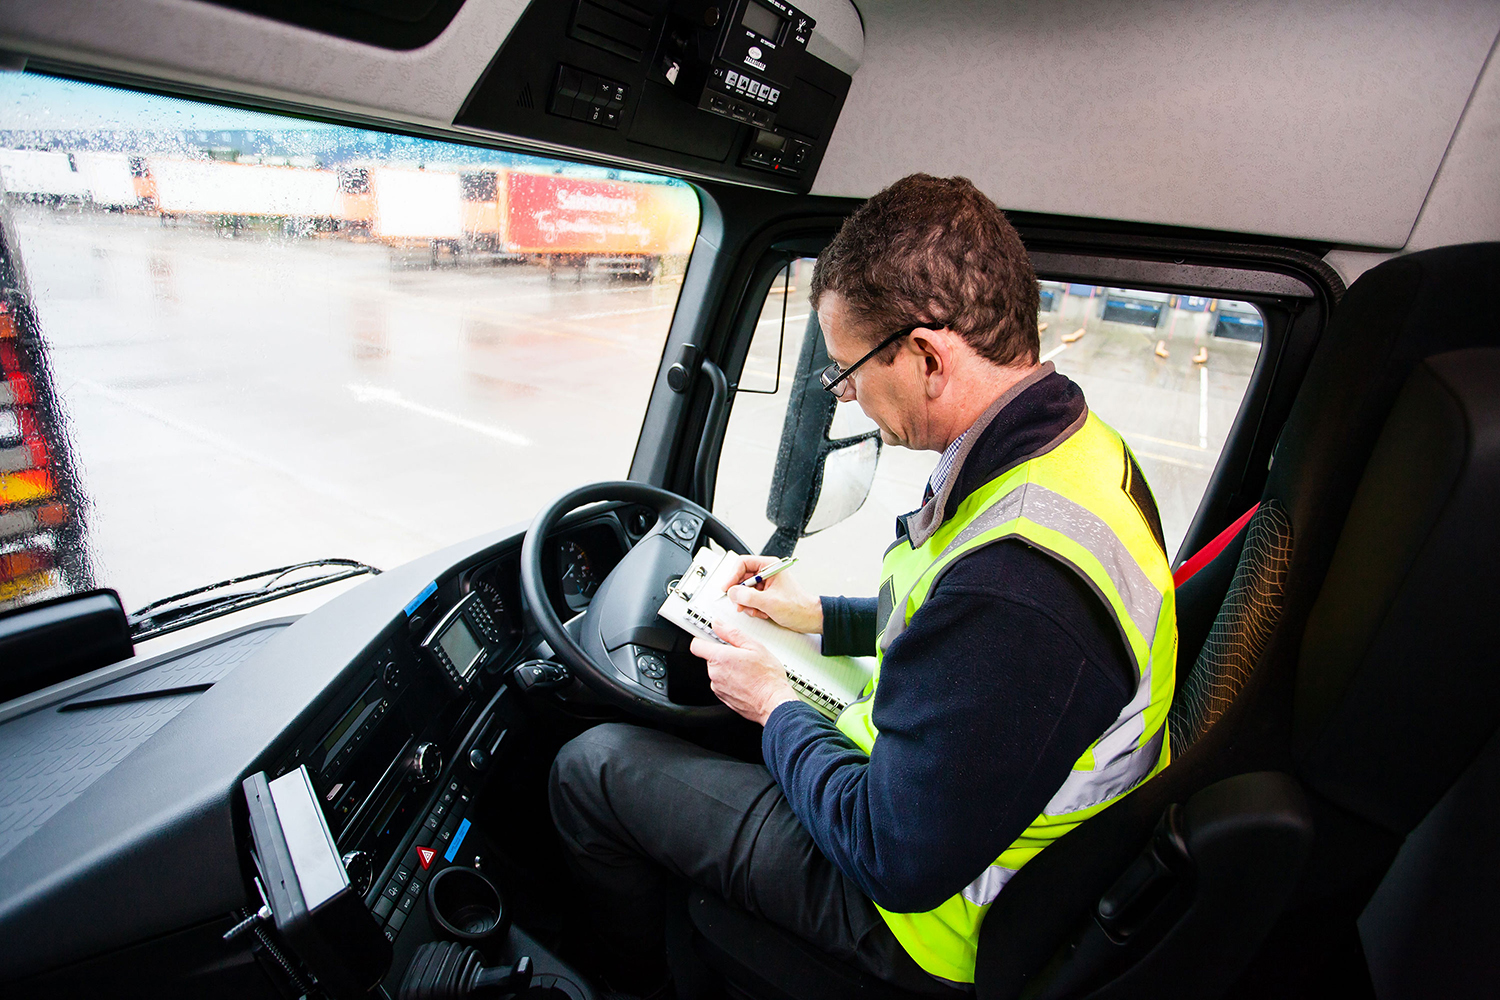 Employers in the transport and logistics industry are currently facing several big worries around Driver CPC.